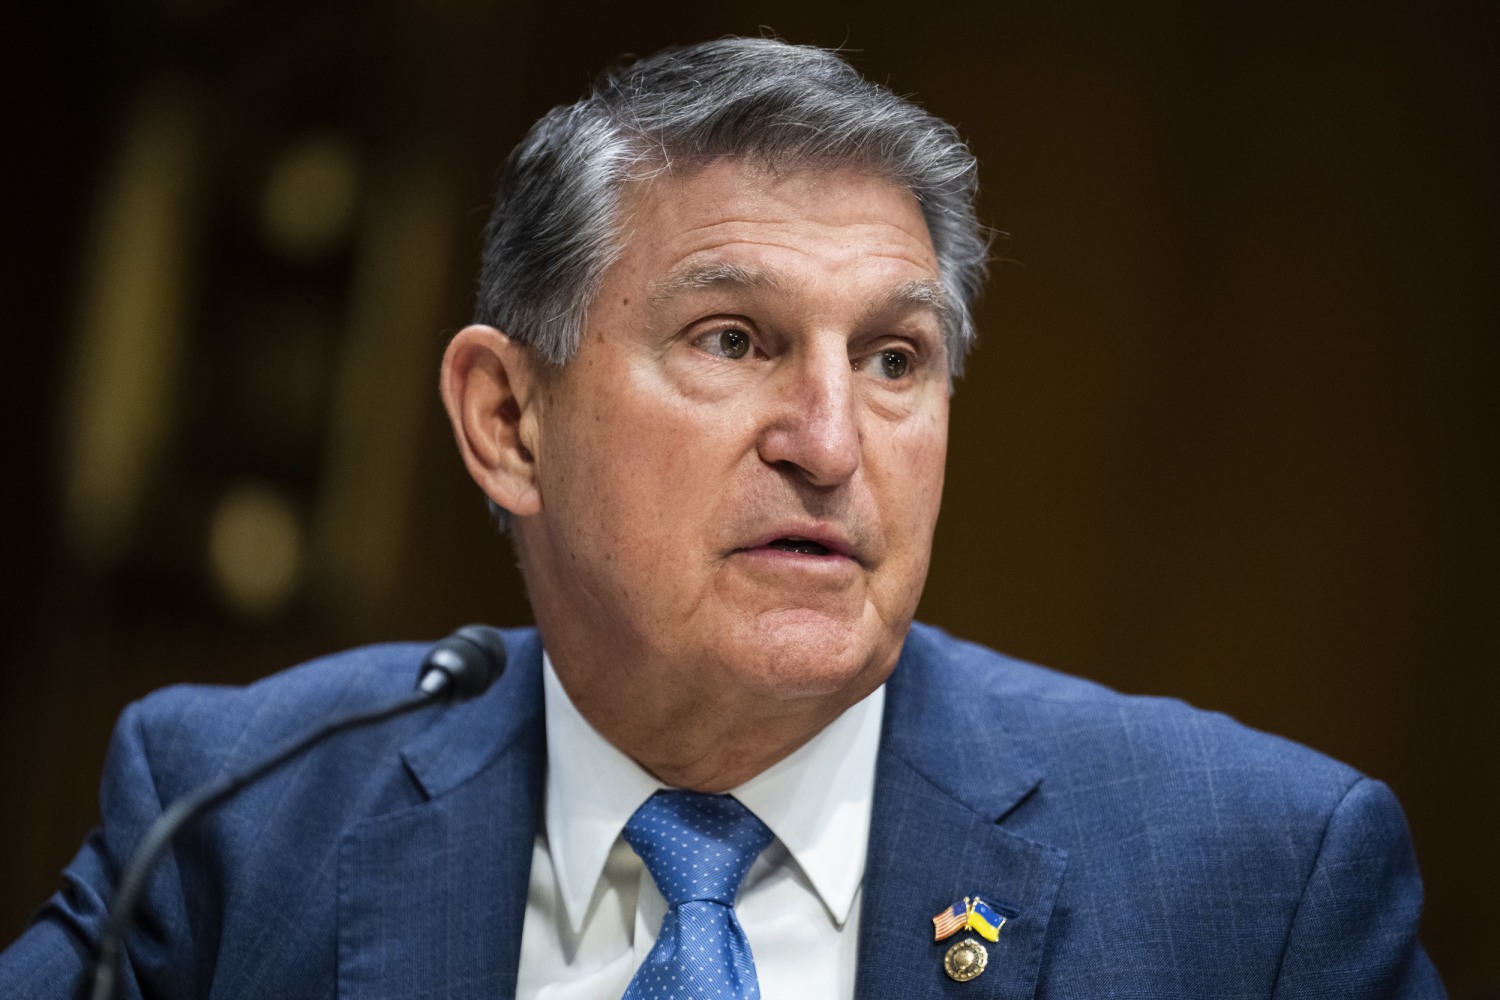 Joe Manchin Dismisses Presidential Candidacy Hours After Reports He Was Exploring a Run: ‘I Don’t Need That In My Life’ (mediaite.com)